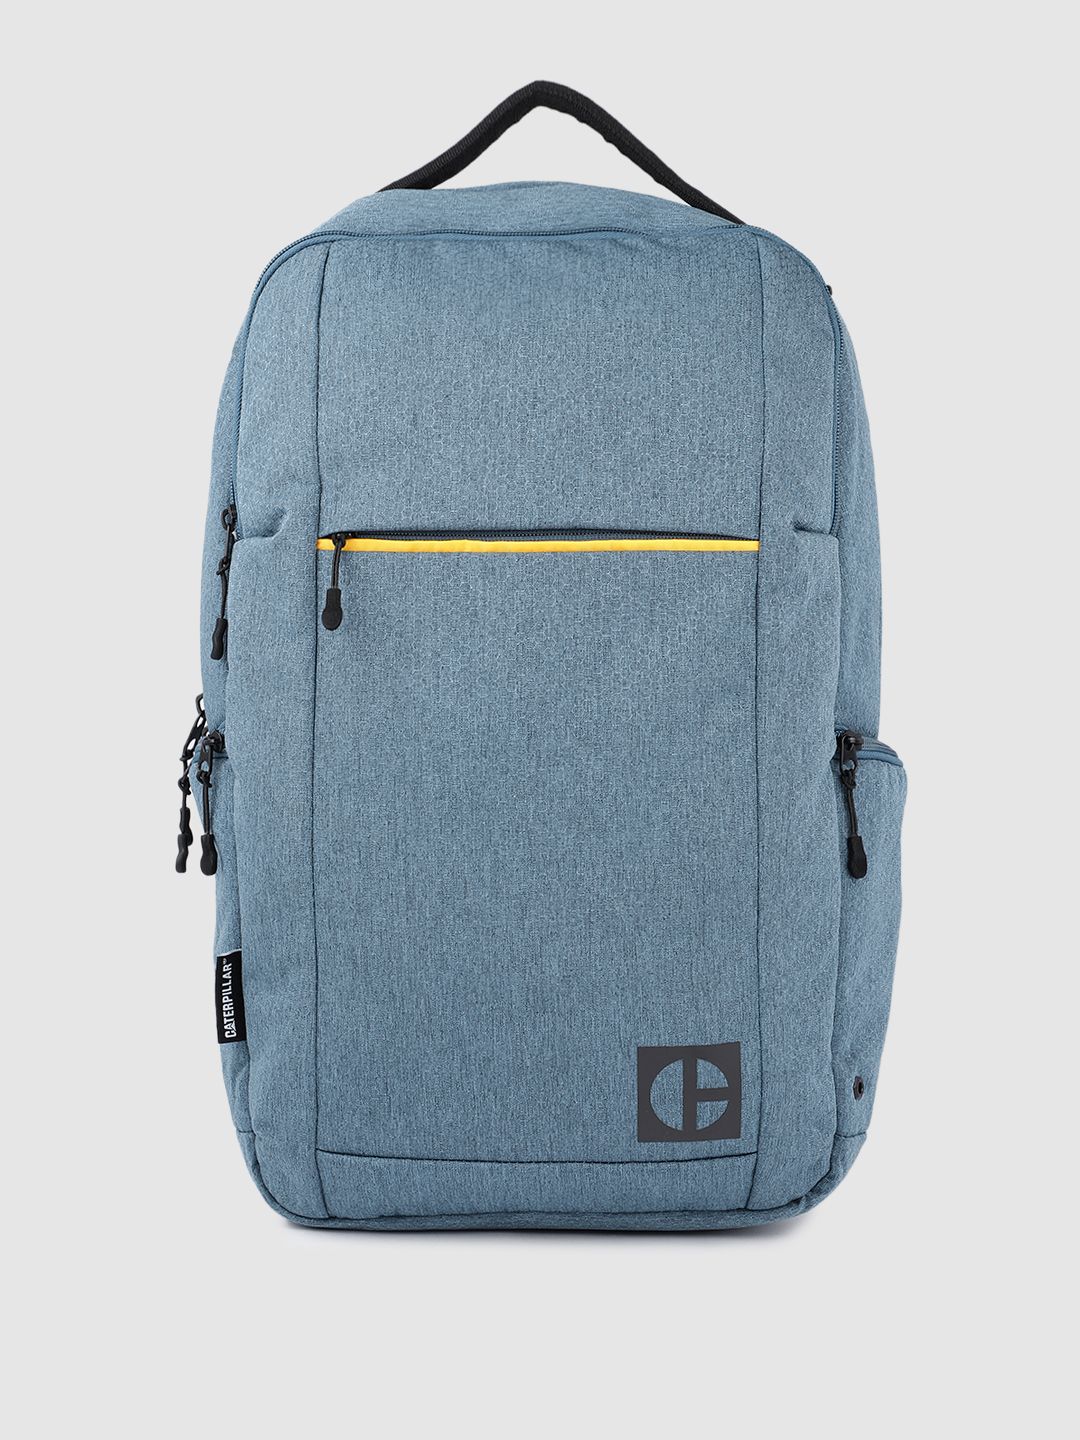 CAT Blue Camouflage Backpack with Compression Straps Price in India